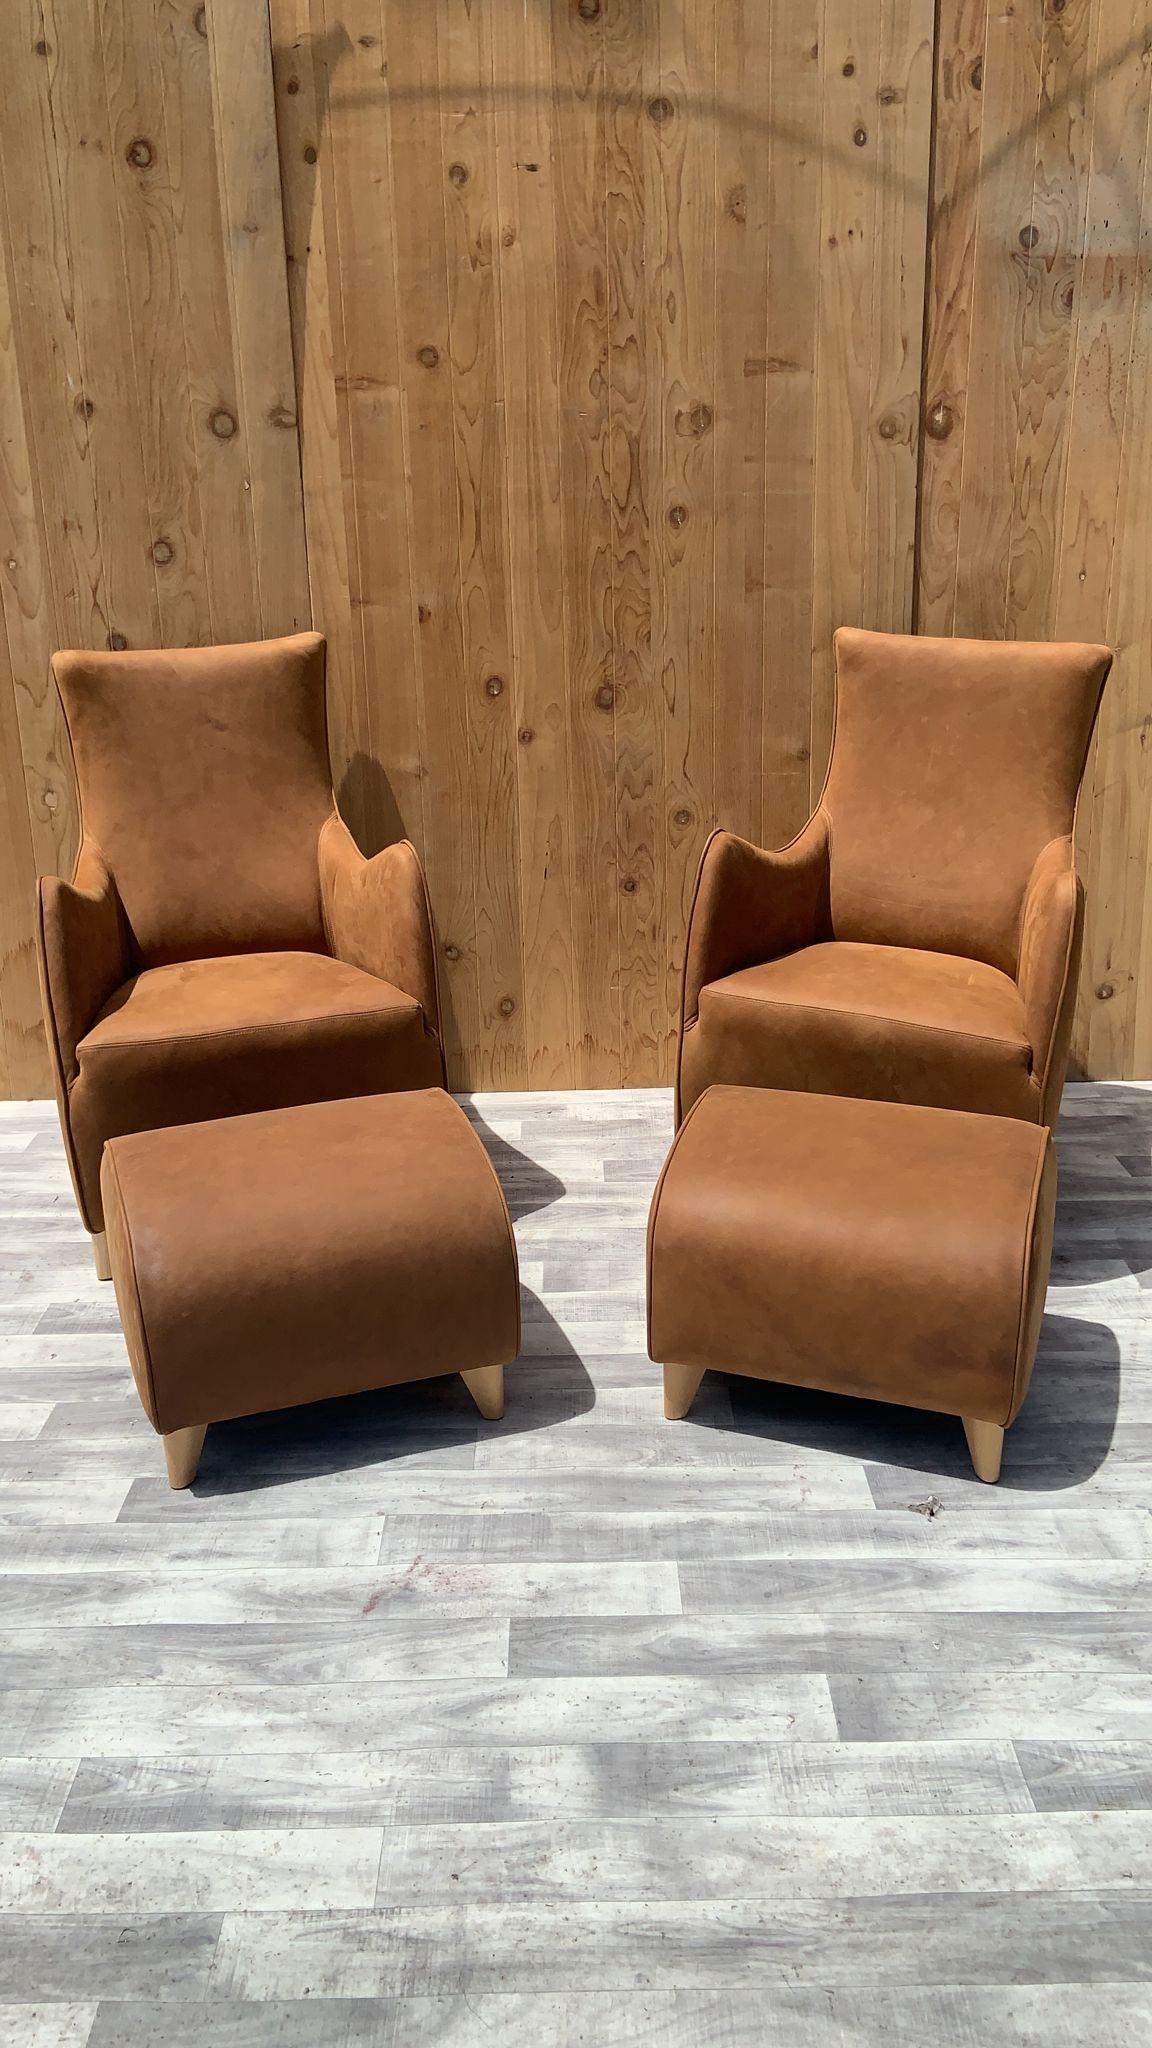 Vintage Mid Century Modern Gerard Van Den Berg 2 Lounge Chairs & 2 Ottomans Newly Upholstered in Natural Raw Leather - 4 Piece Set

Stunning mid century modern living room set consists of two lounge chairs and two ottoman by Gerard Van Den Berg. We